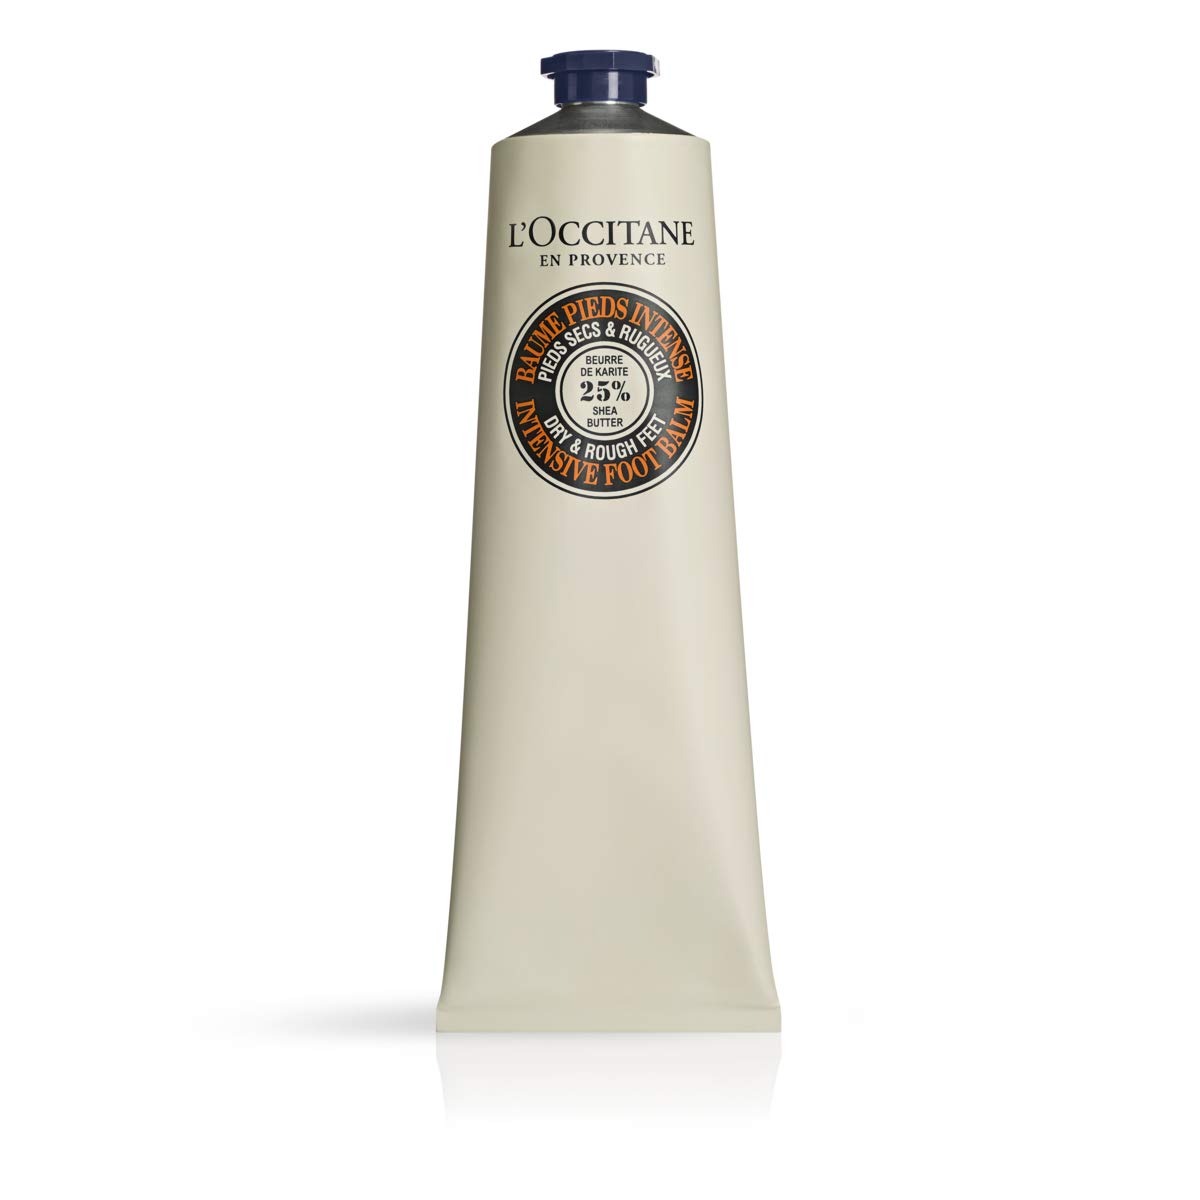 L'Occitane Shea Butter Intensive Foot Balm - Nourishing and Soothing for Dry Feet, 5.3 oz